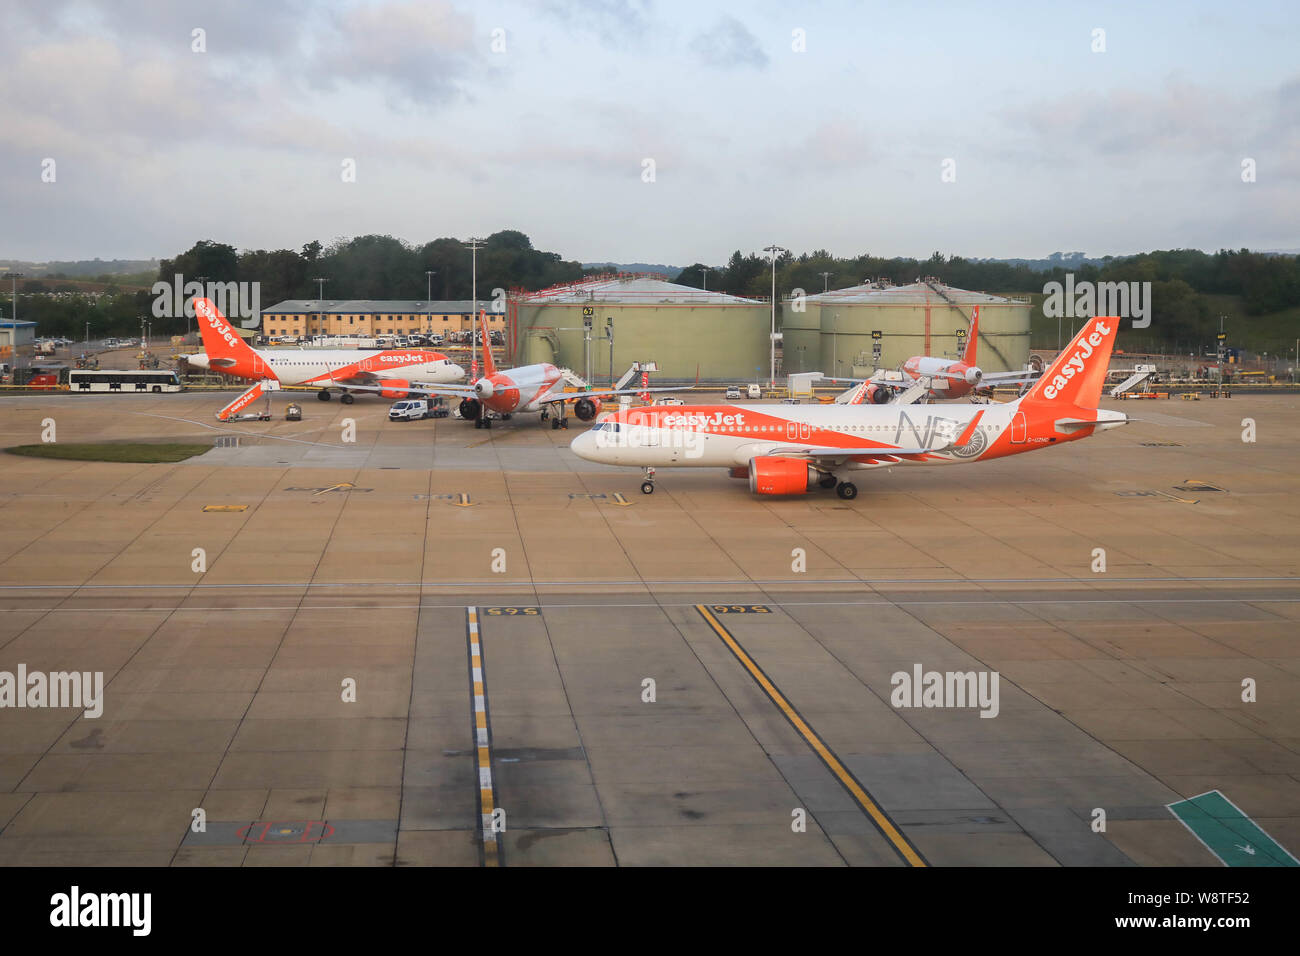 London, UK. 11th Aug, 2019. An EasyJet aircraft seen on the runway at Gatwick Airport in London. Credit: Amer Ghazzal/SOPA Images/ZUMA Wire/Alamy Live News Stock Photo